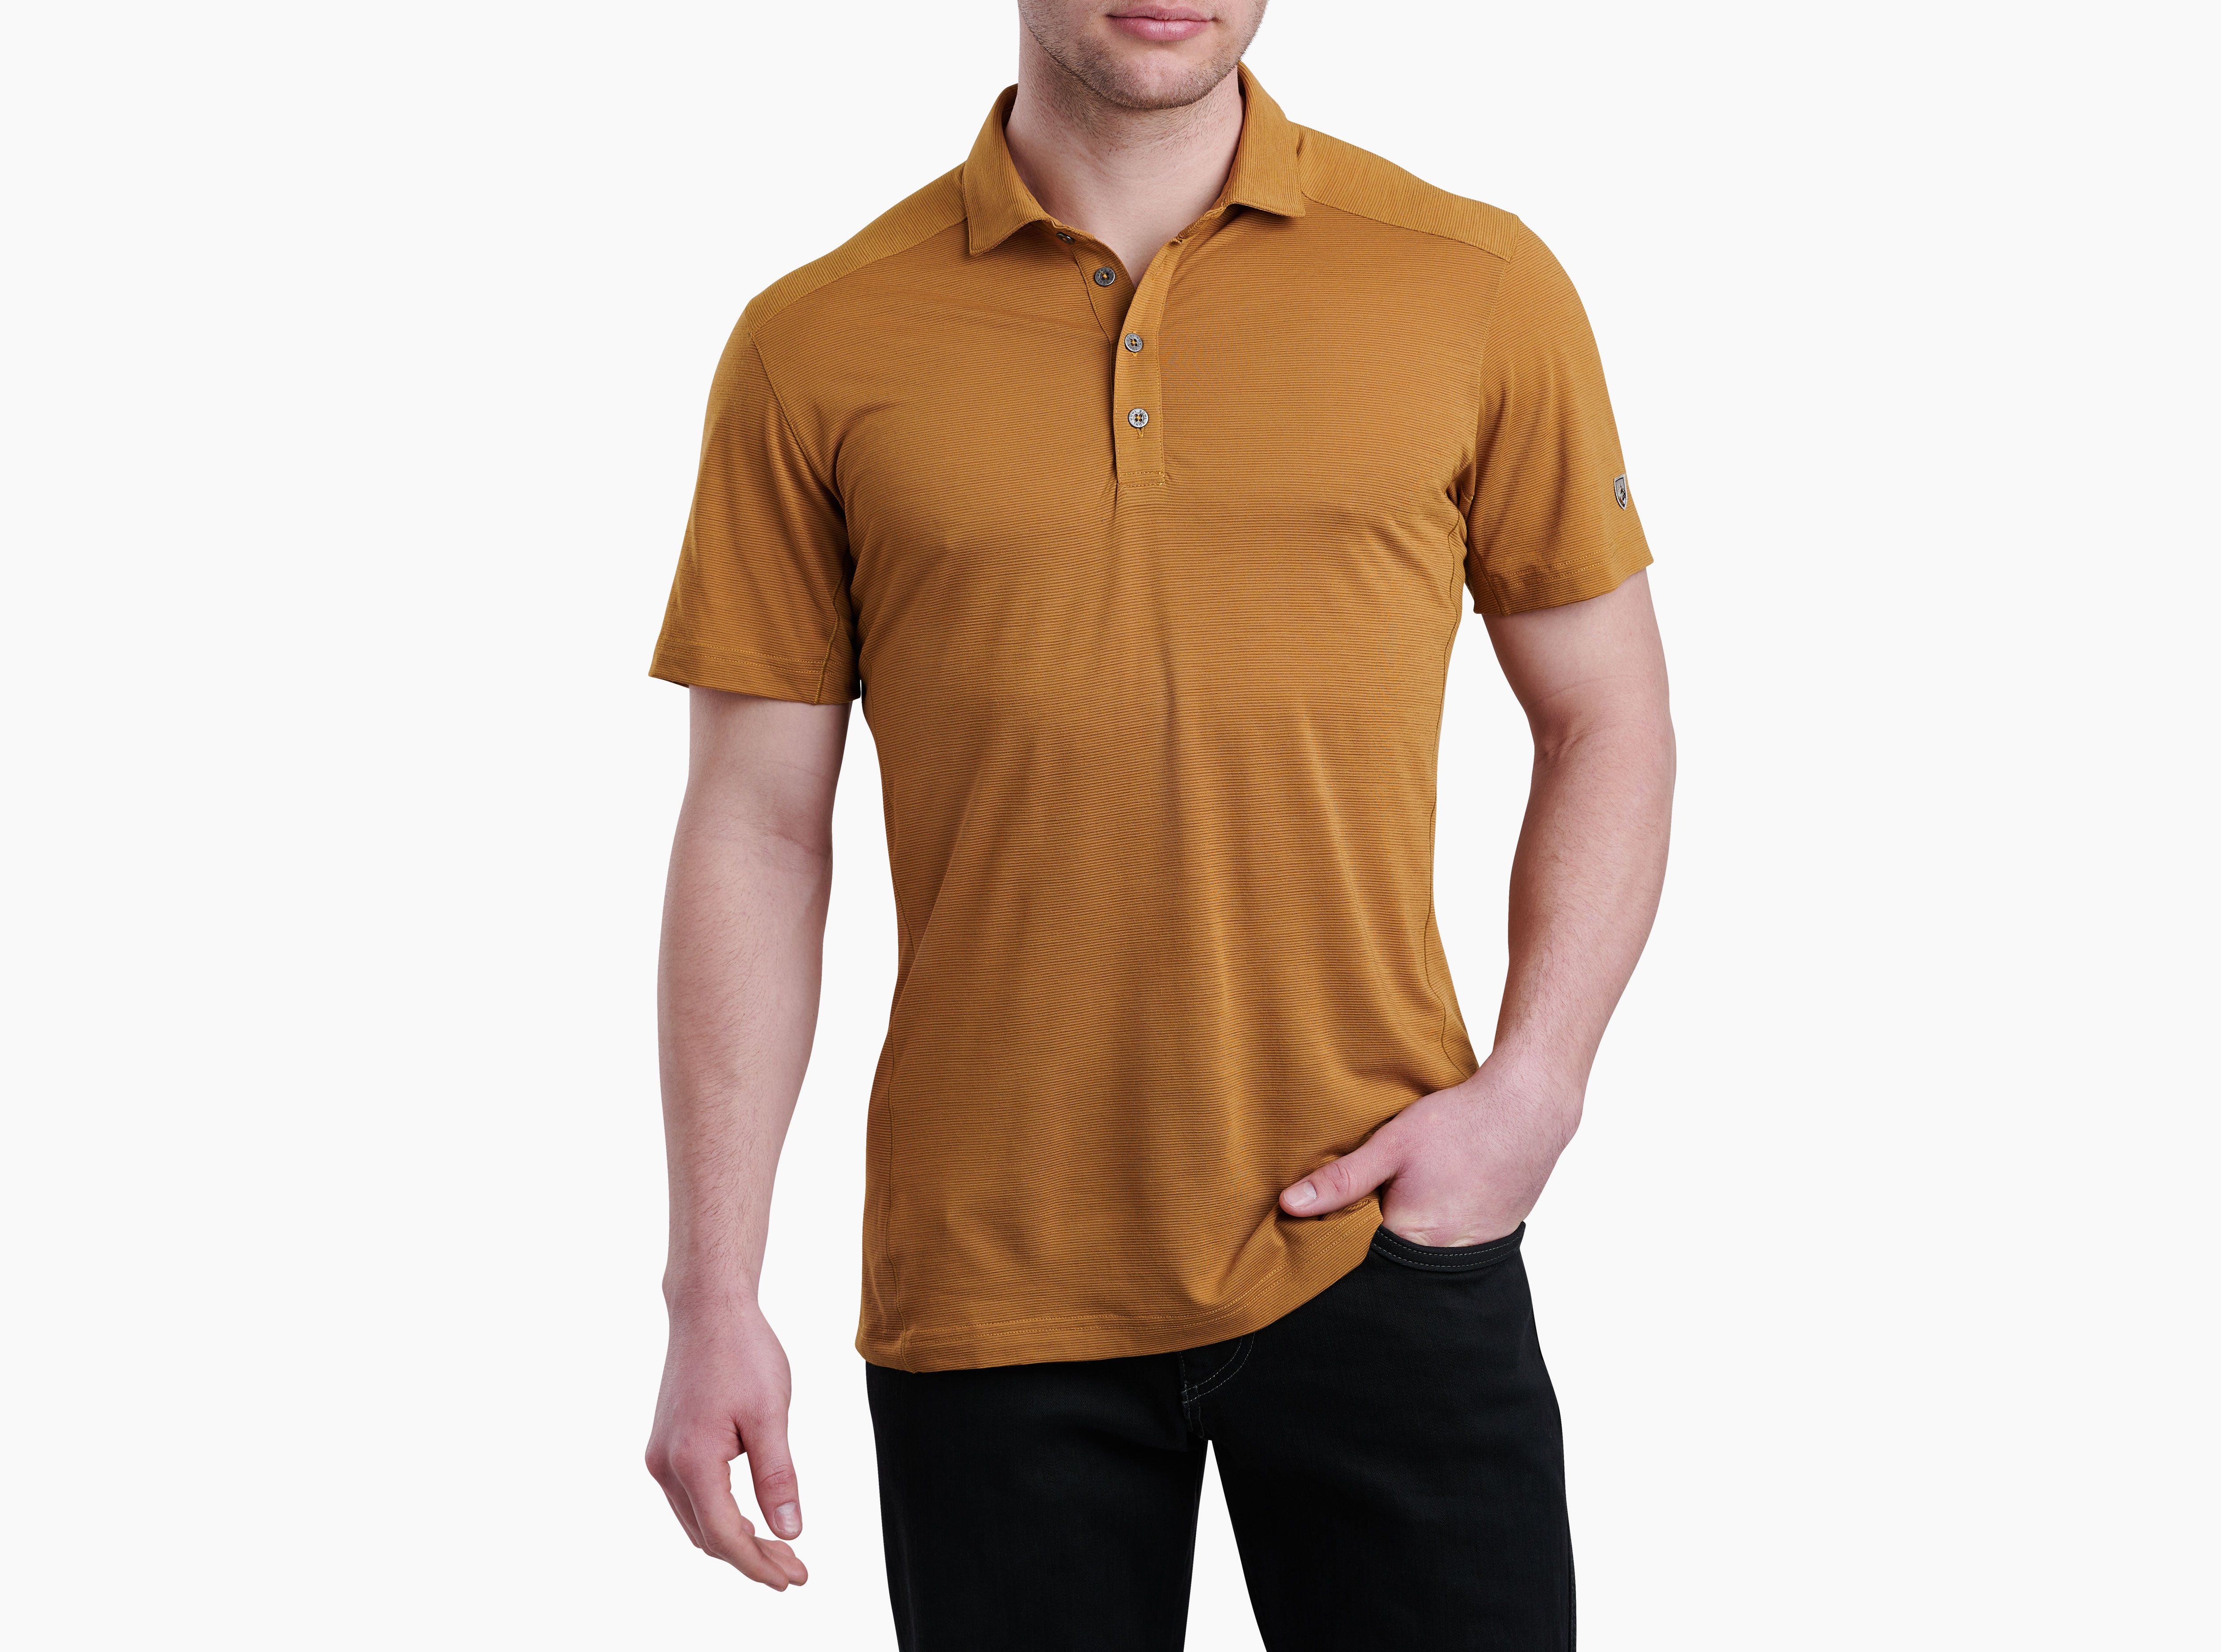 Kuhl Valiant Polo Shirt 7469 - Bootery Boutique